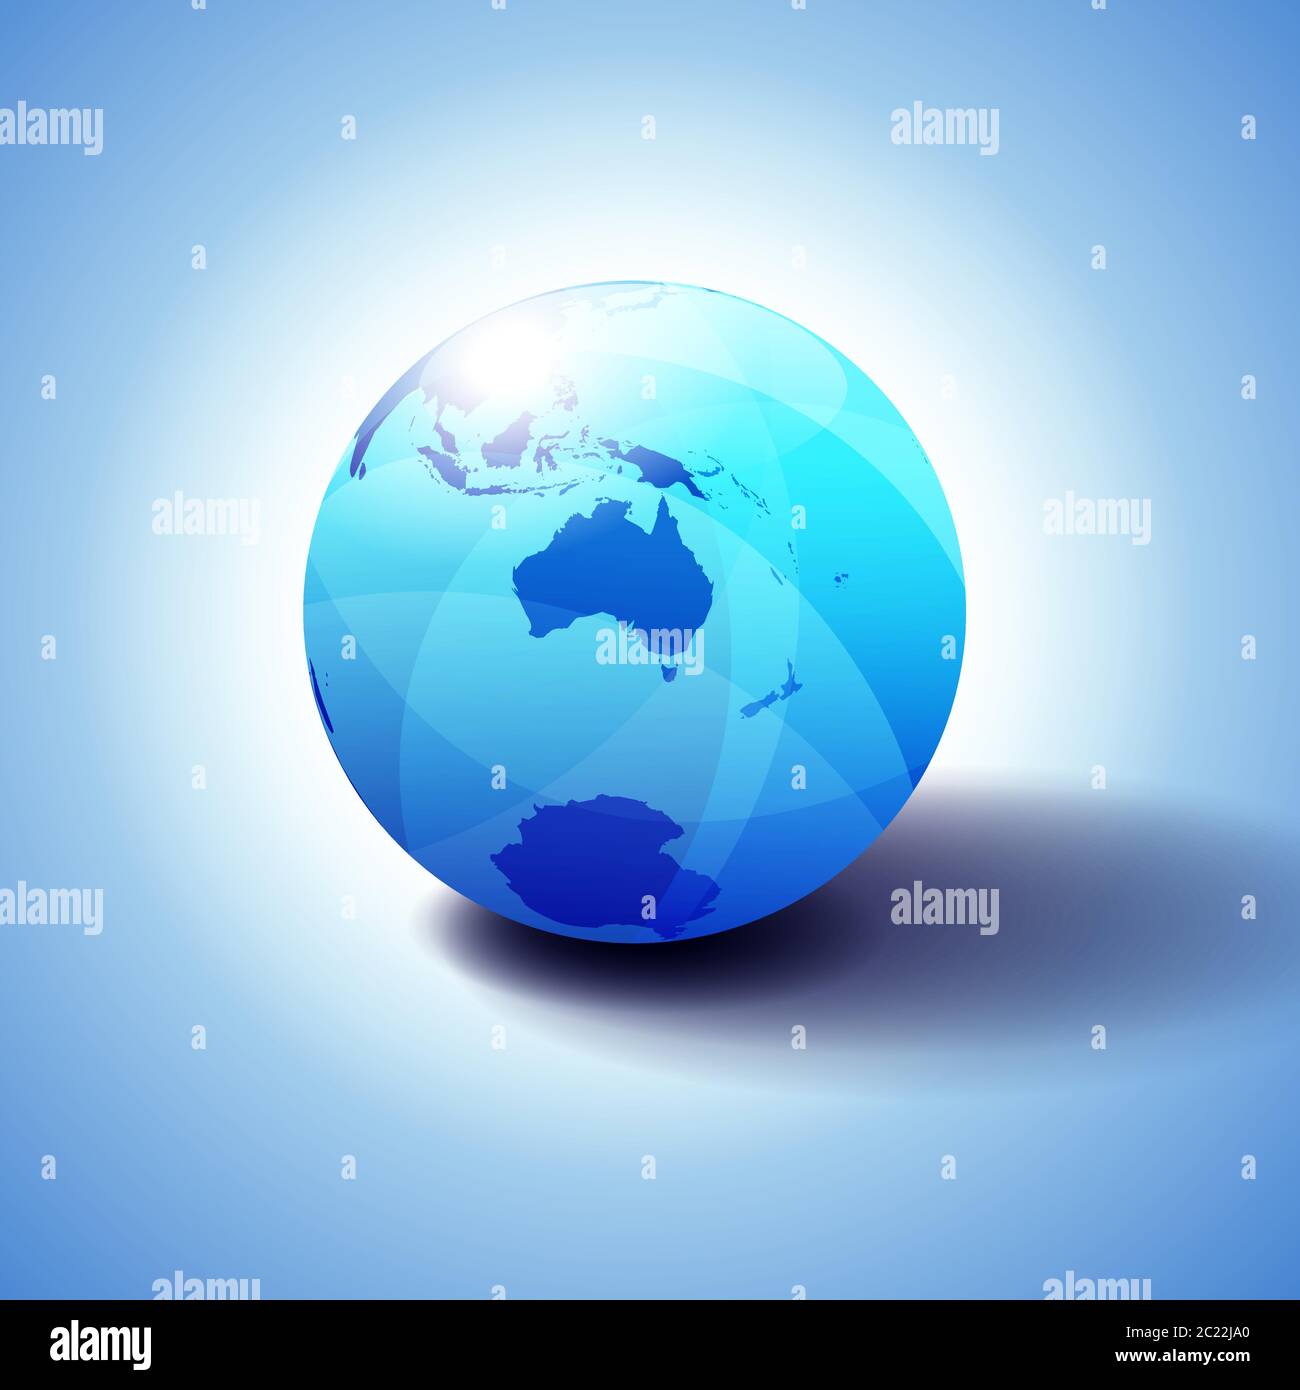 Australia and New Zealand, South Pole, Antarctica, Background with Globe Icon 3D illustration, Glossy, Shiny Sphere with Global Map in Subtle Blues Stock Vector